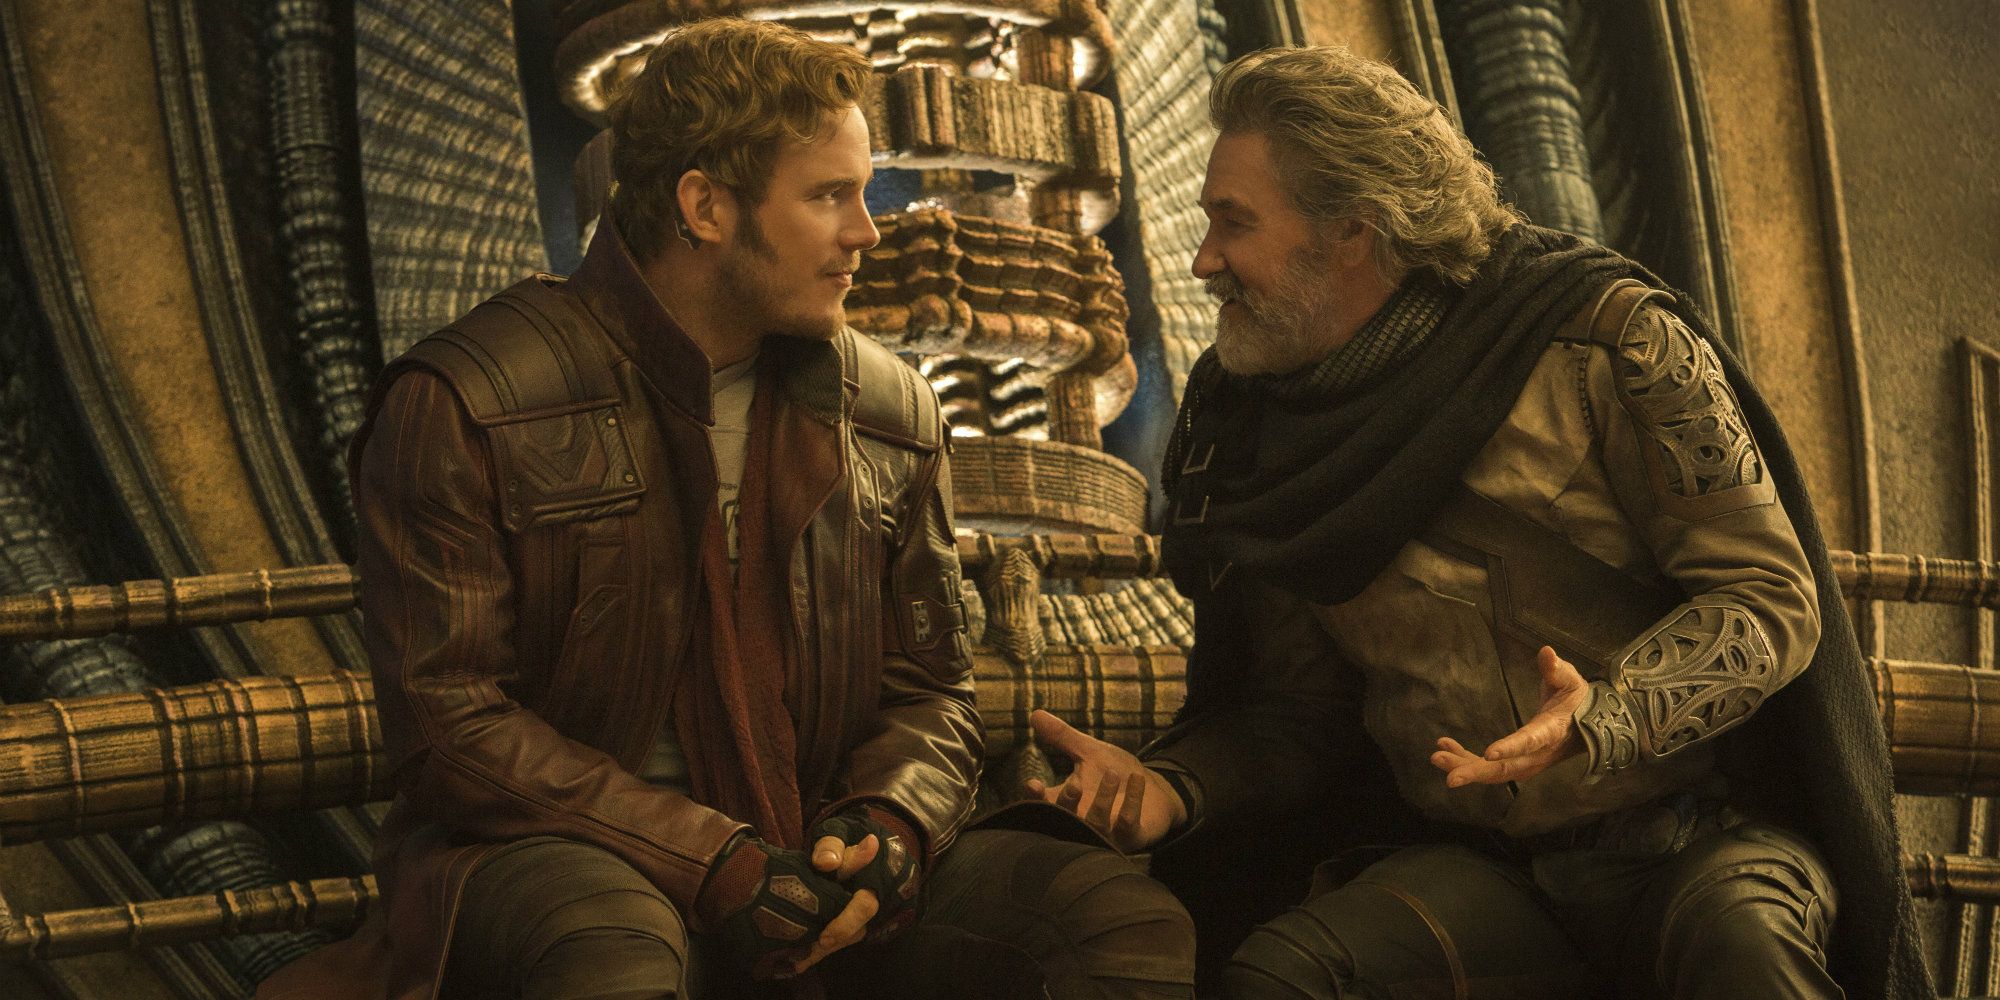 Peter sits and talks with Ego in Guardians of the Galaxy vol. 2